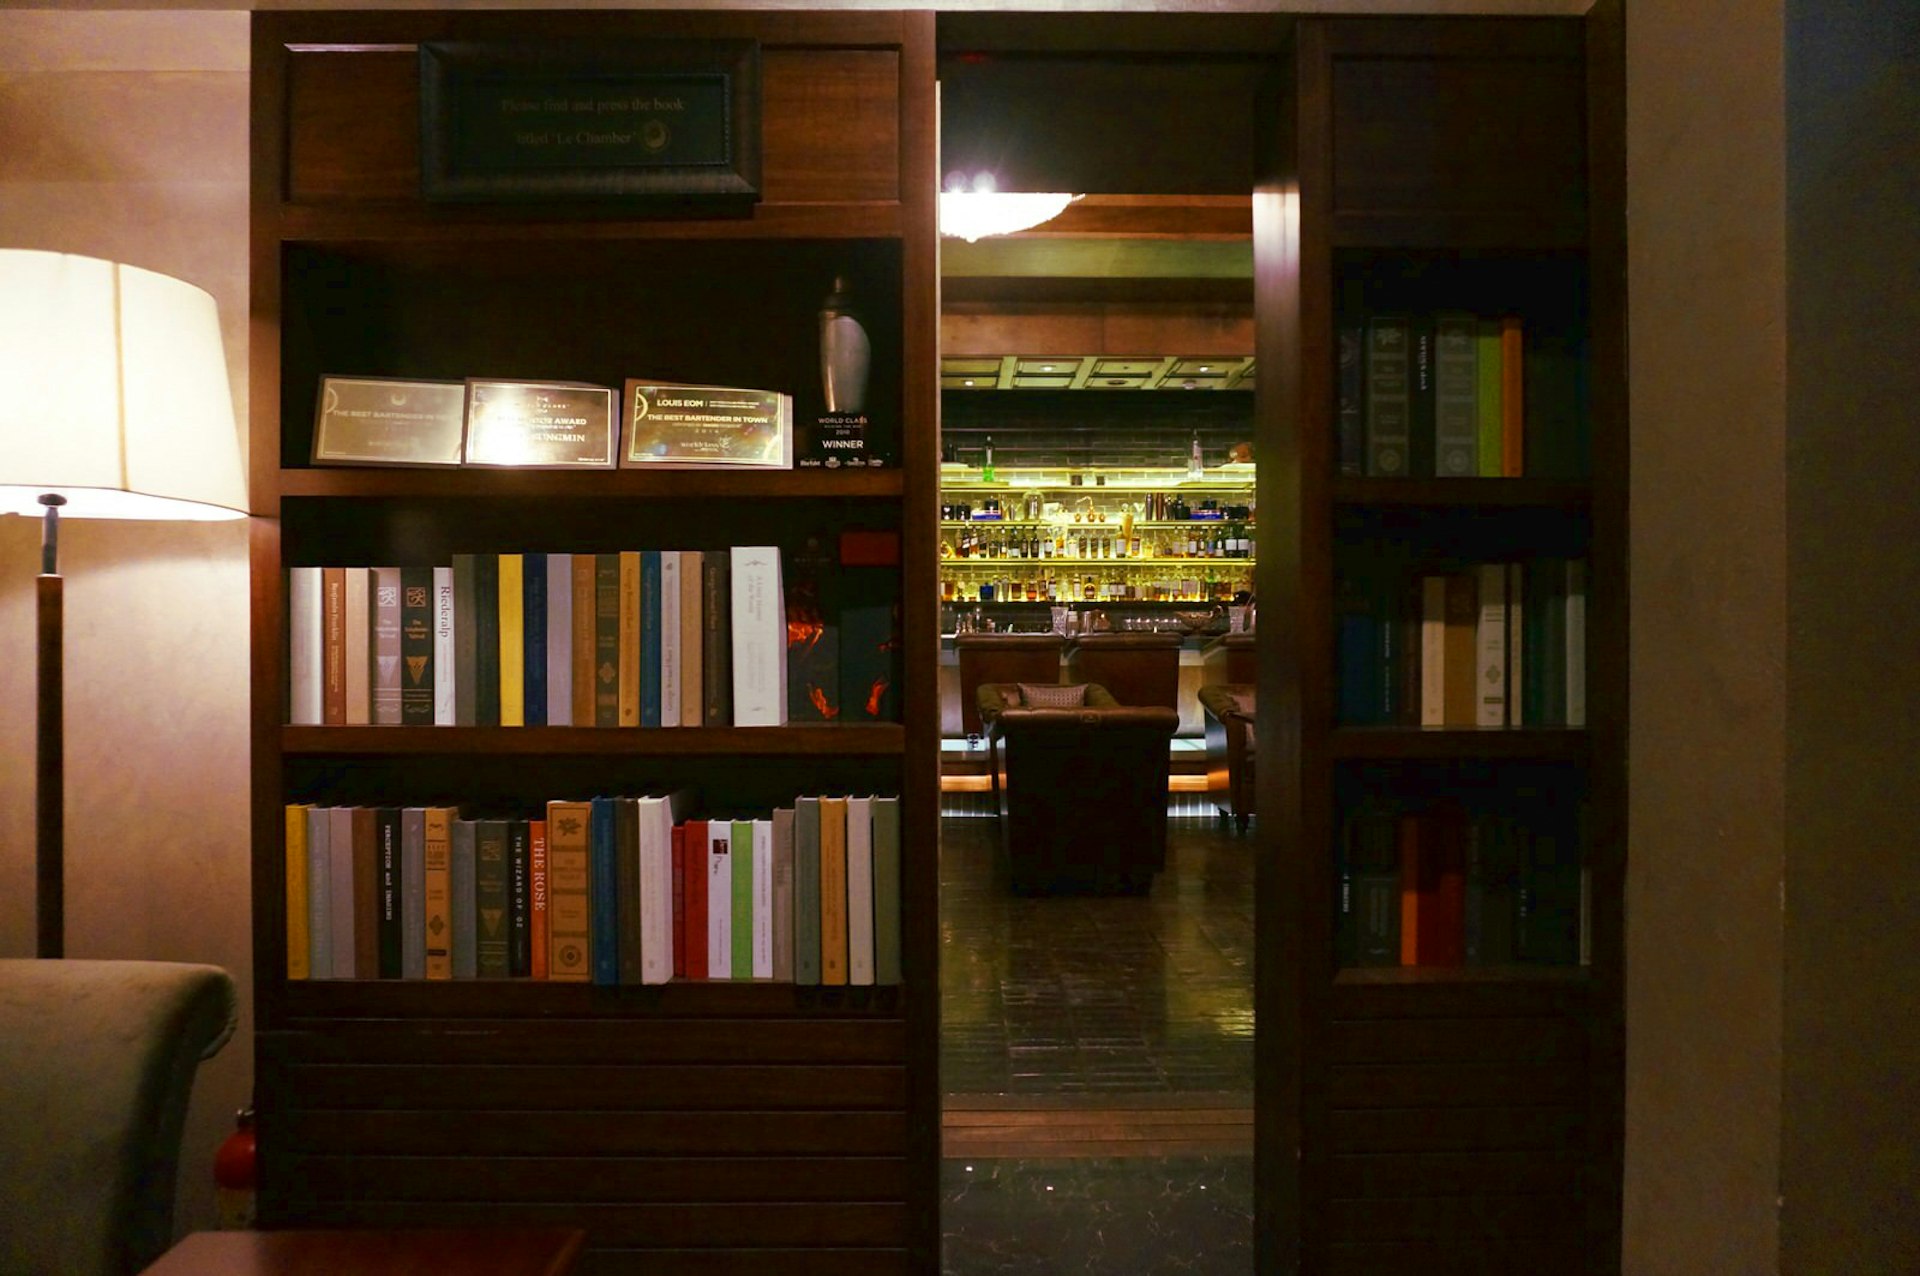 Le Chamber is a high-end drinking chamber hidden behind a library © Hahna Yoon / Lonely Planet